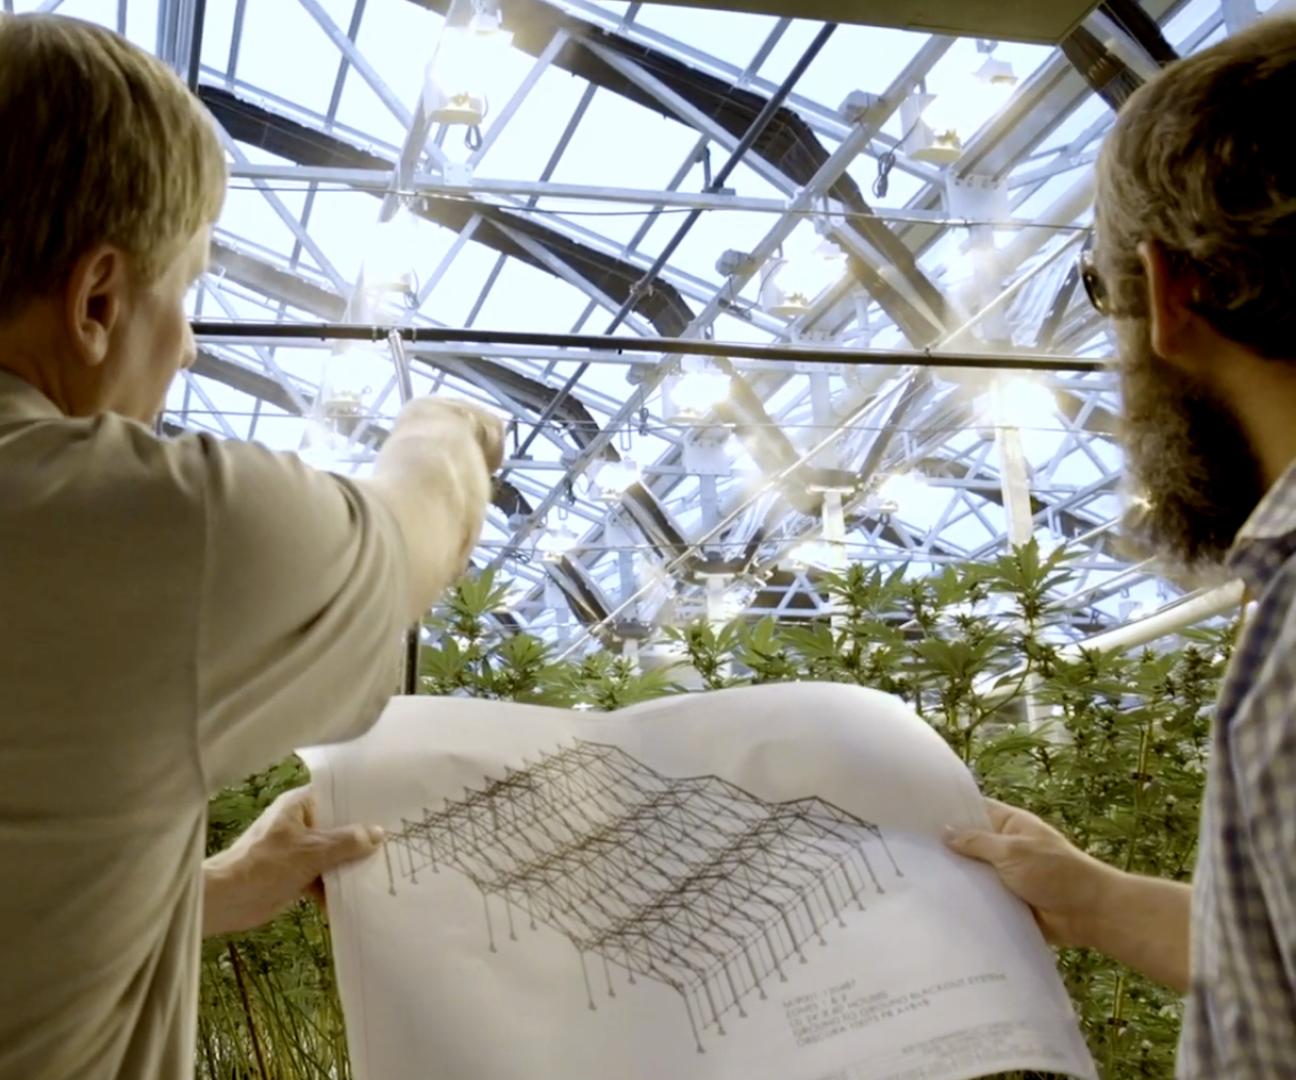 two men standing inside a greenhouse, holding a blueprint-looking sketch of a greenhouse